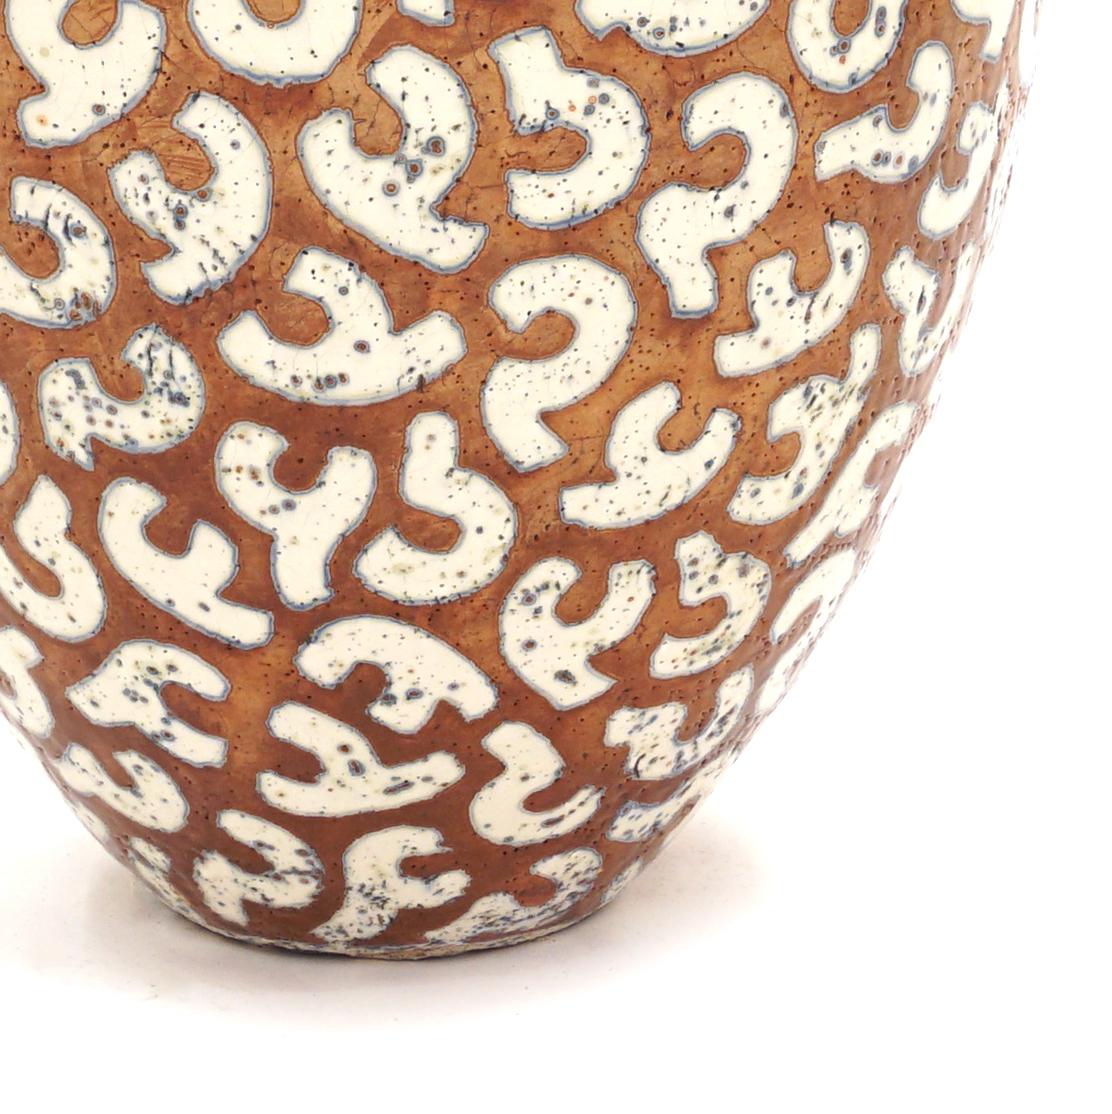 Modern Colossal stoneware Floor Vase with Windings in Relief by Per Weiss, Denmark